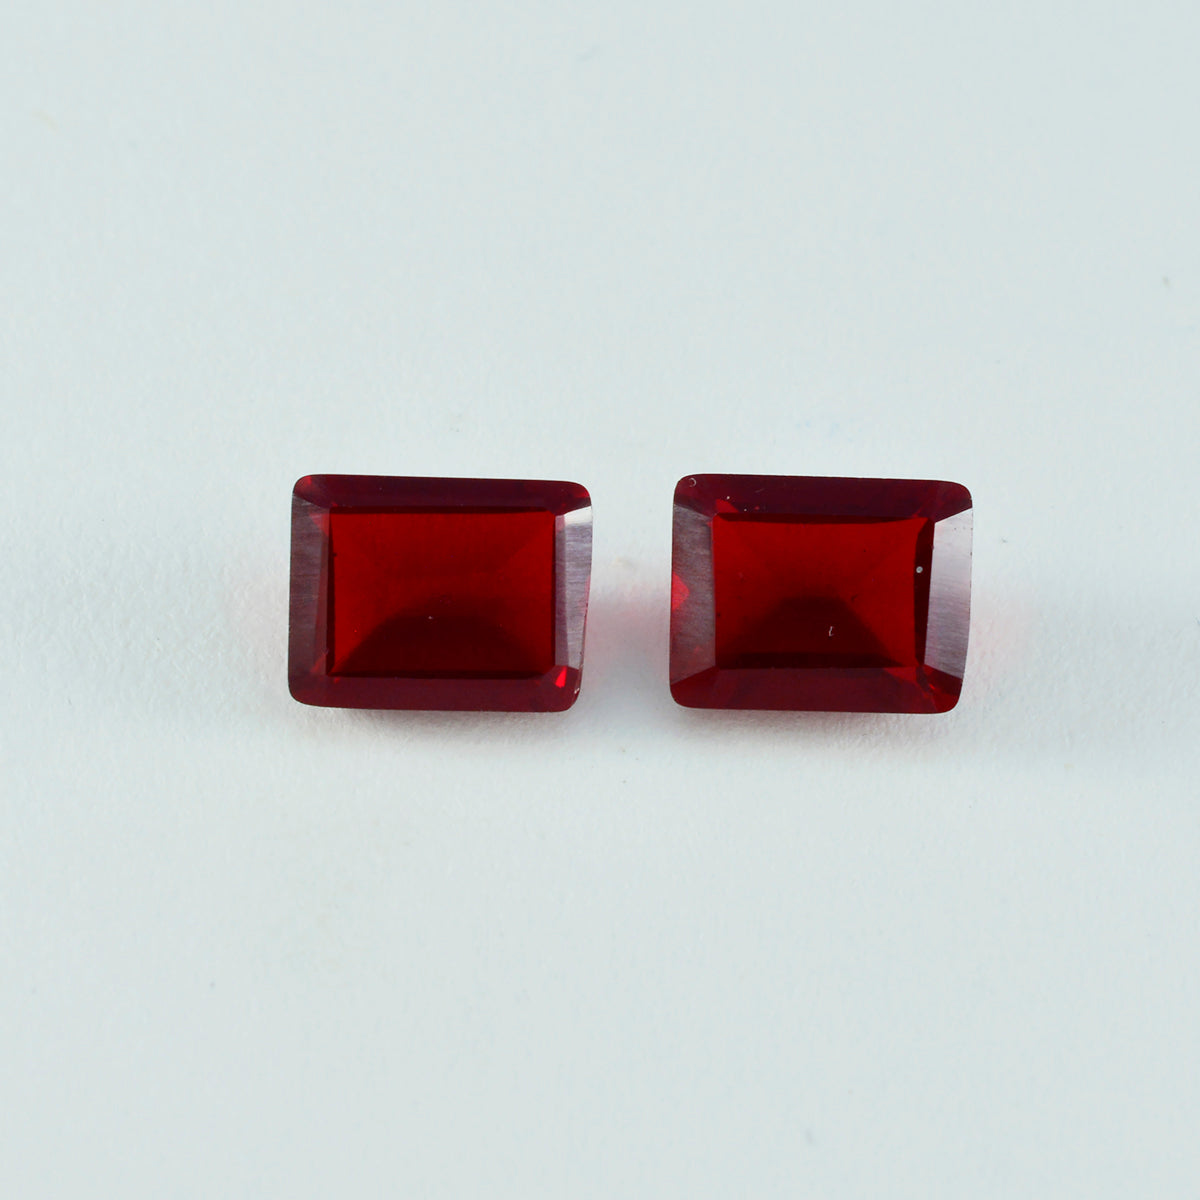 Riyogems 1PC Red Ruby CZ Faceted 12x16 mm Octagon Shape great Quality Loose Gemstone